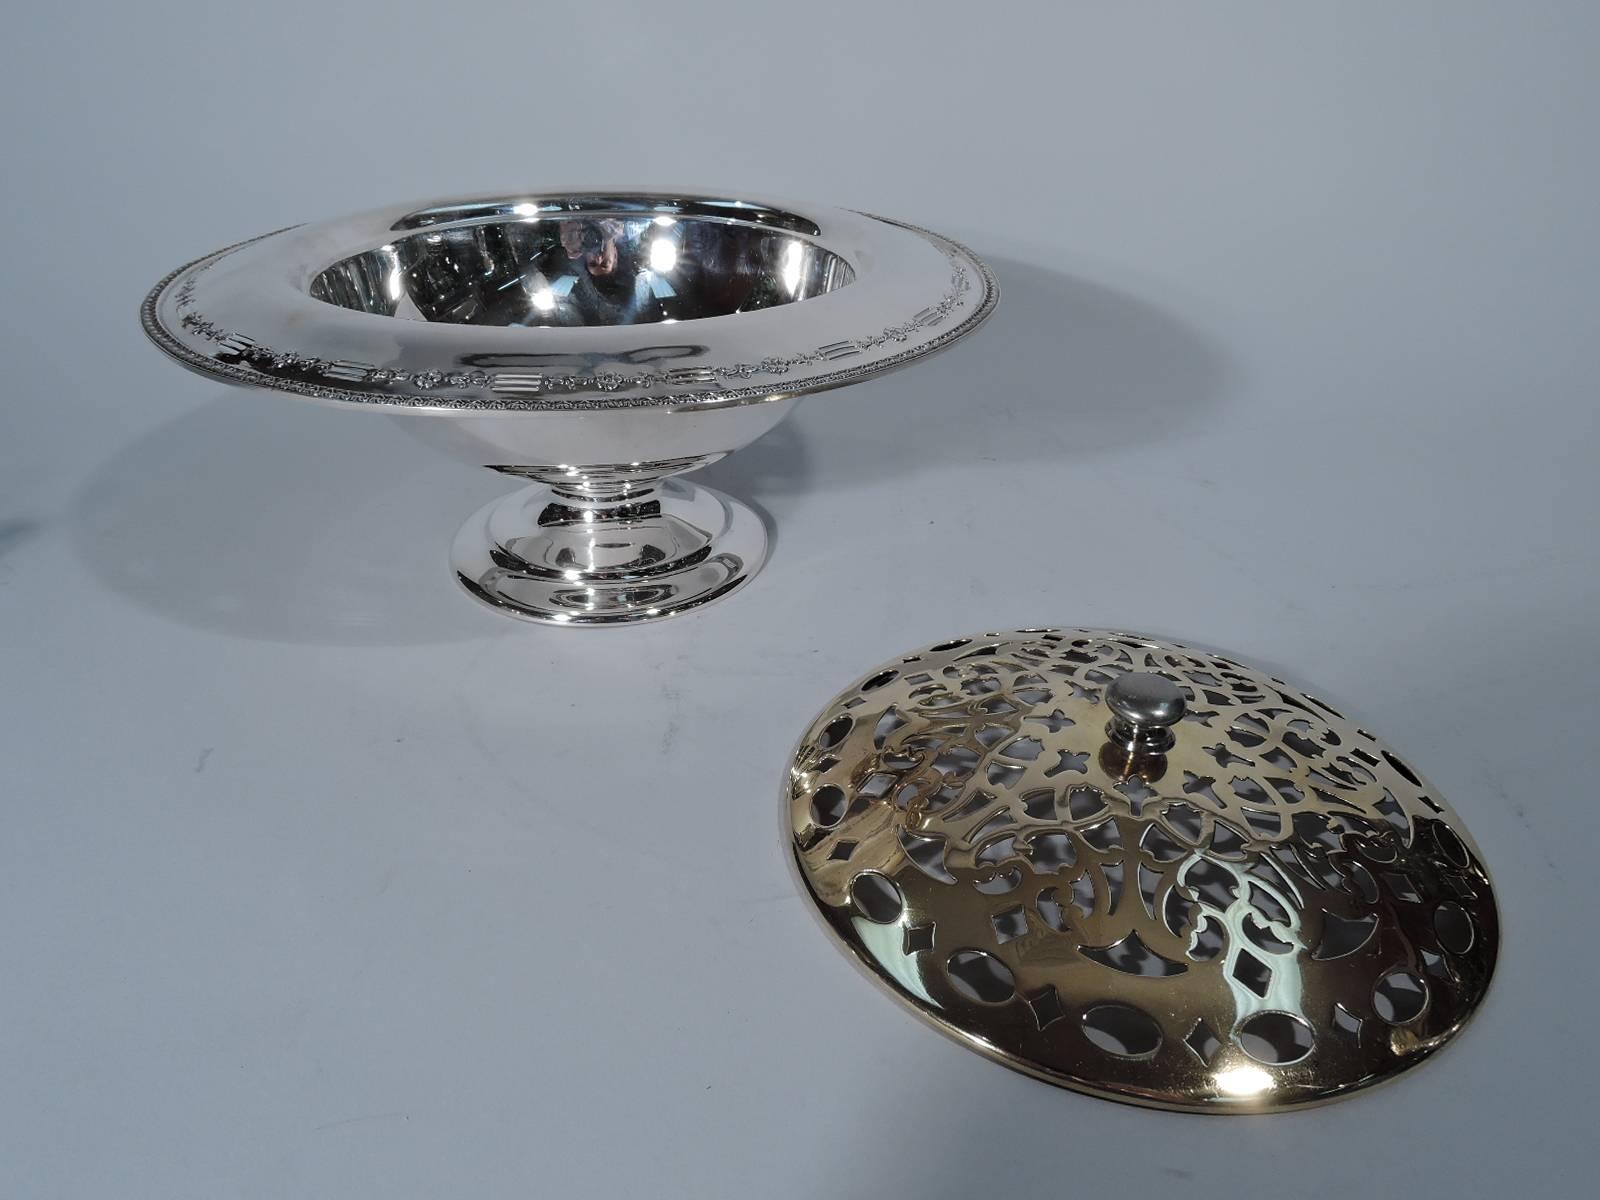 Sterling silver vase with brass frog. Made by Reed & Barton in Taunton, Mass., circa 1915. Round bowl with turned-down rim and stepped foot. Rim has low-relief leaf-and-dart border and floral garland alternating with pierced horizontal lines. Frog